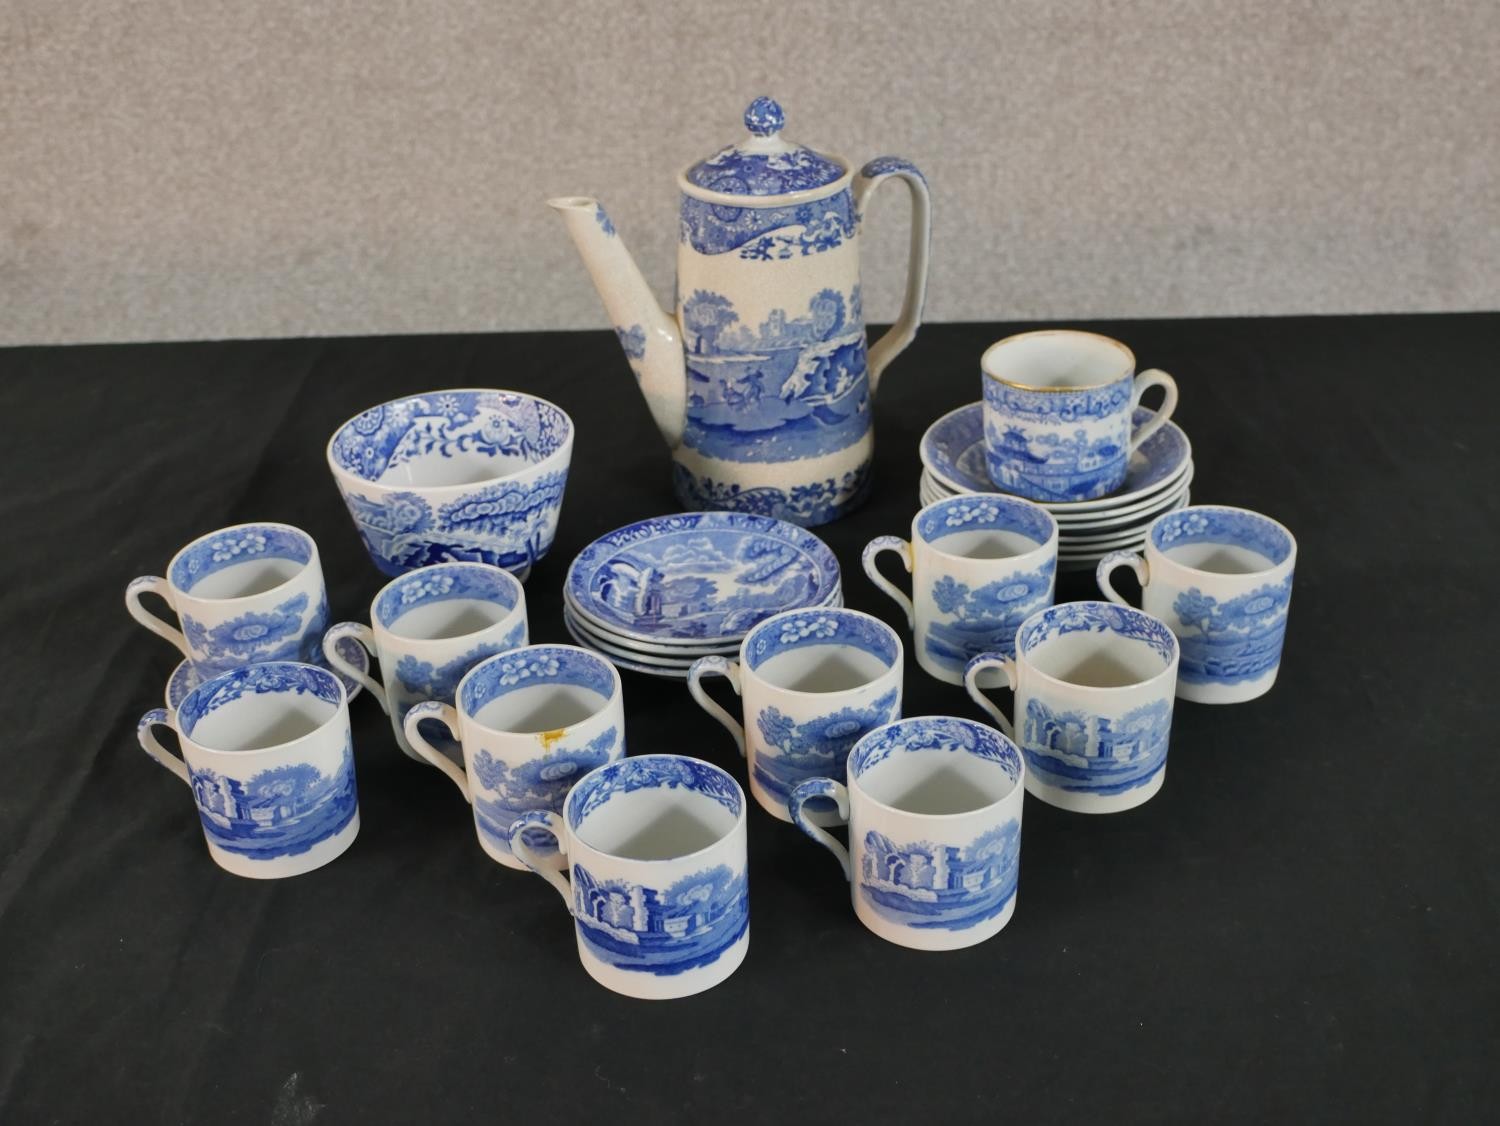 A Copeland Spode Italian pattern coffee set, blue and white transfer printed, including a coffee